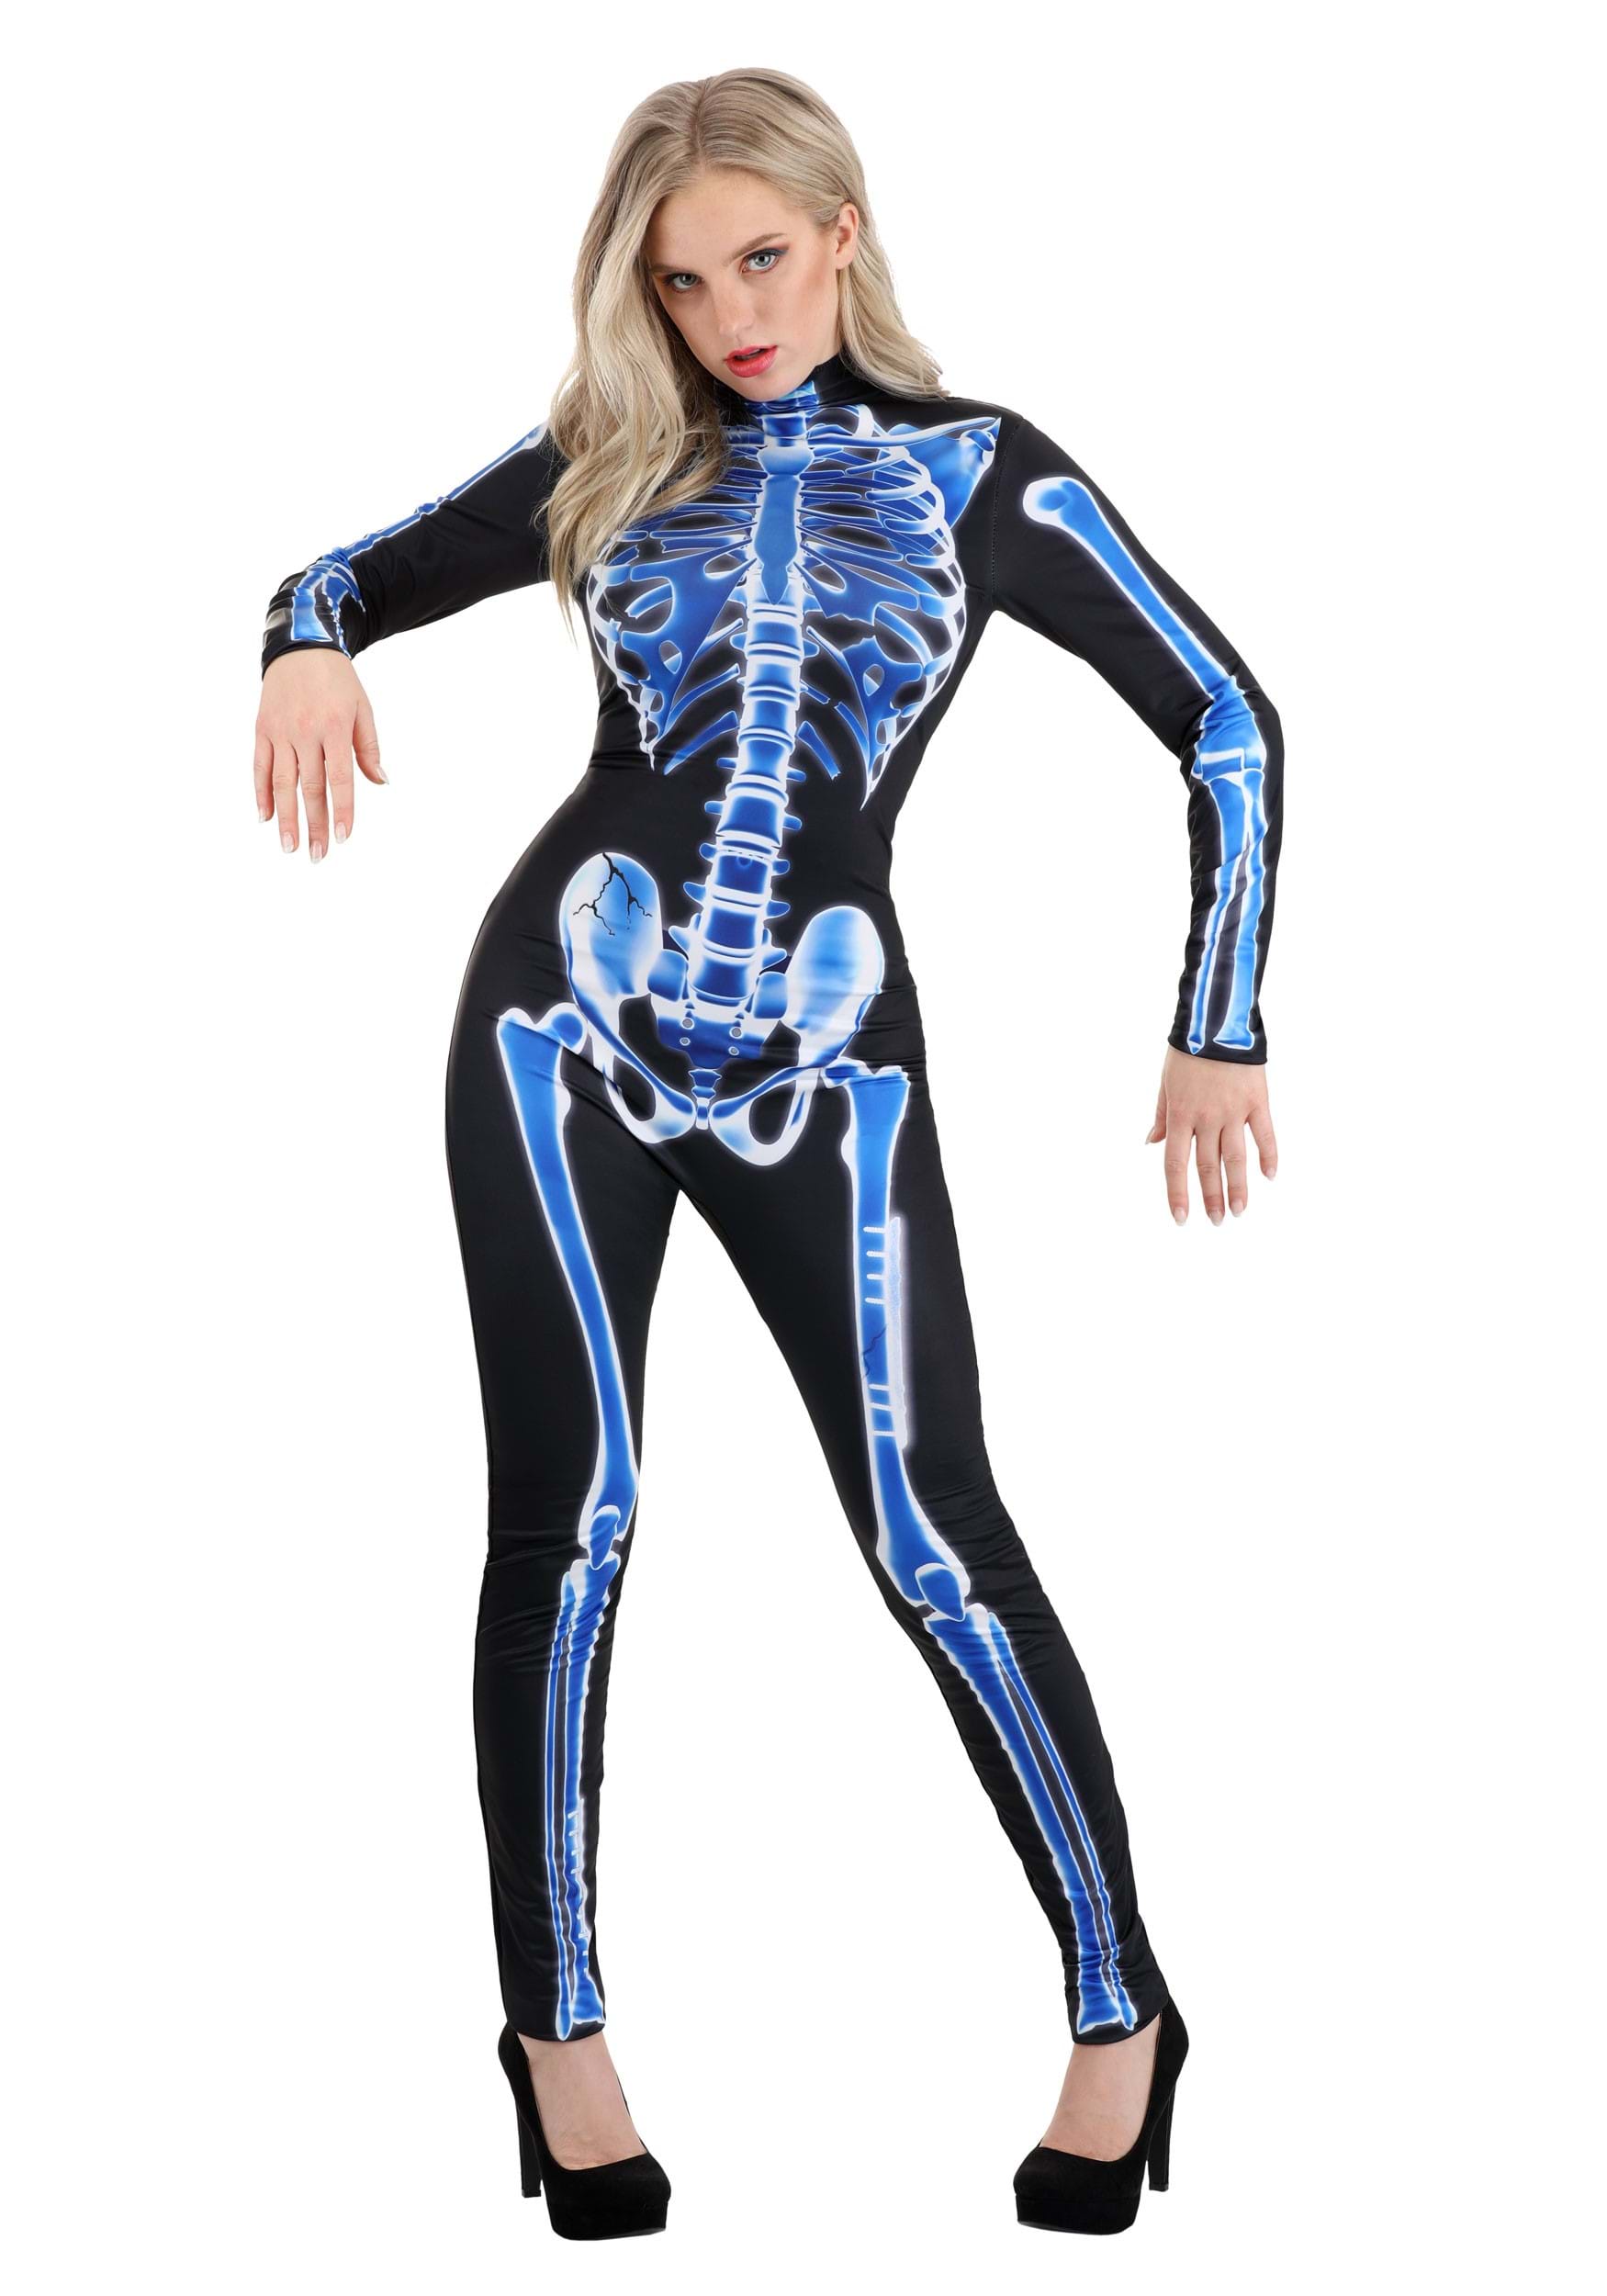 Photos - Fancy Dress X-Ray FUN Costumes  Skeleton Jumpsuit  Costume for Women Black&# 